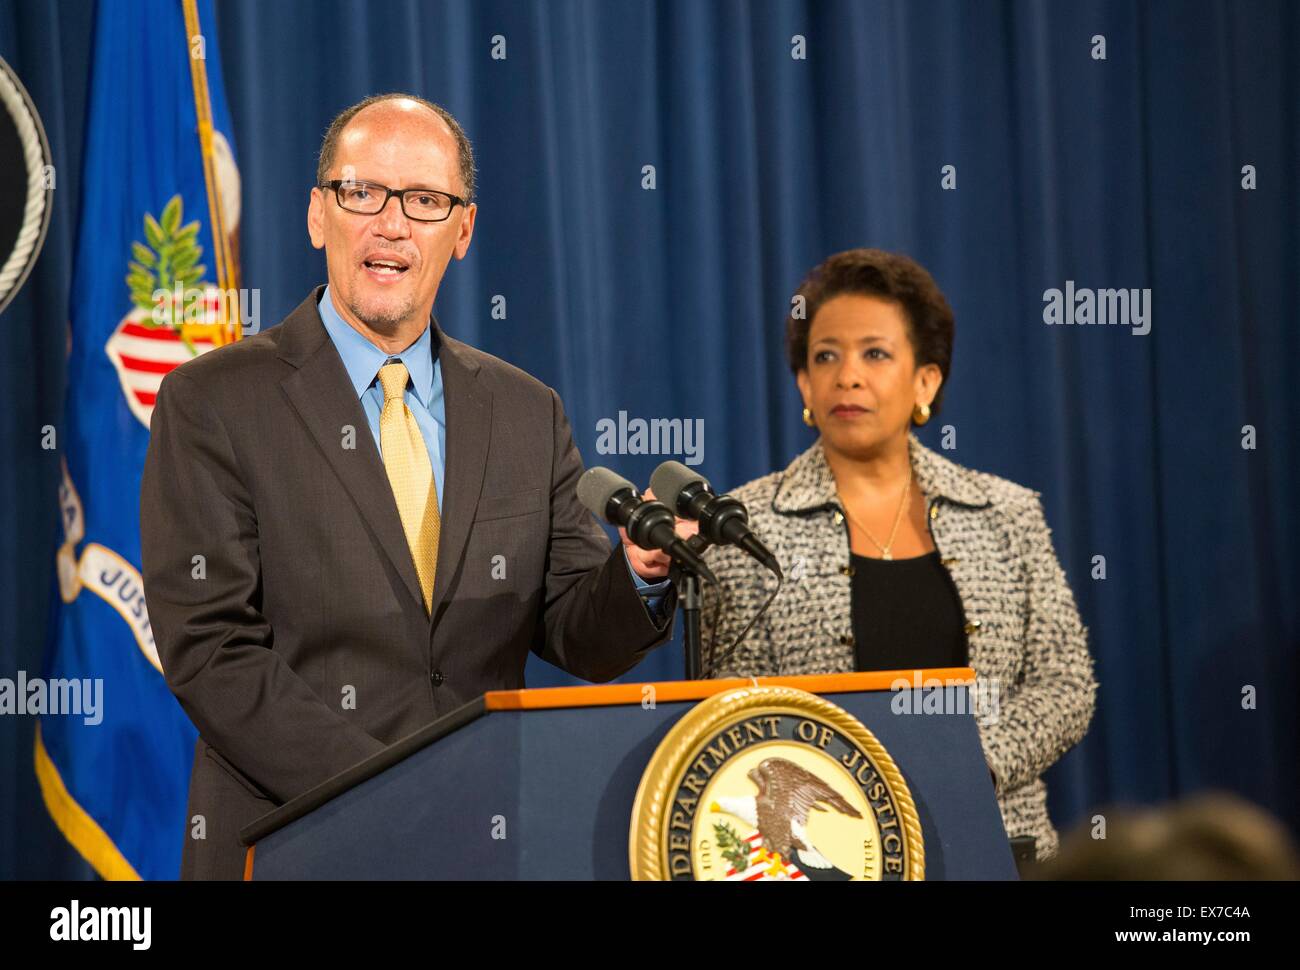 US Secretary of Labor Thomas Perez joins Attorney General Loretta Lynch to discuss ACTeam Phase II implementation in combating human trafficking during a press conference June 25, 2015 in Washington, DC. Stock Photo